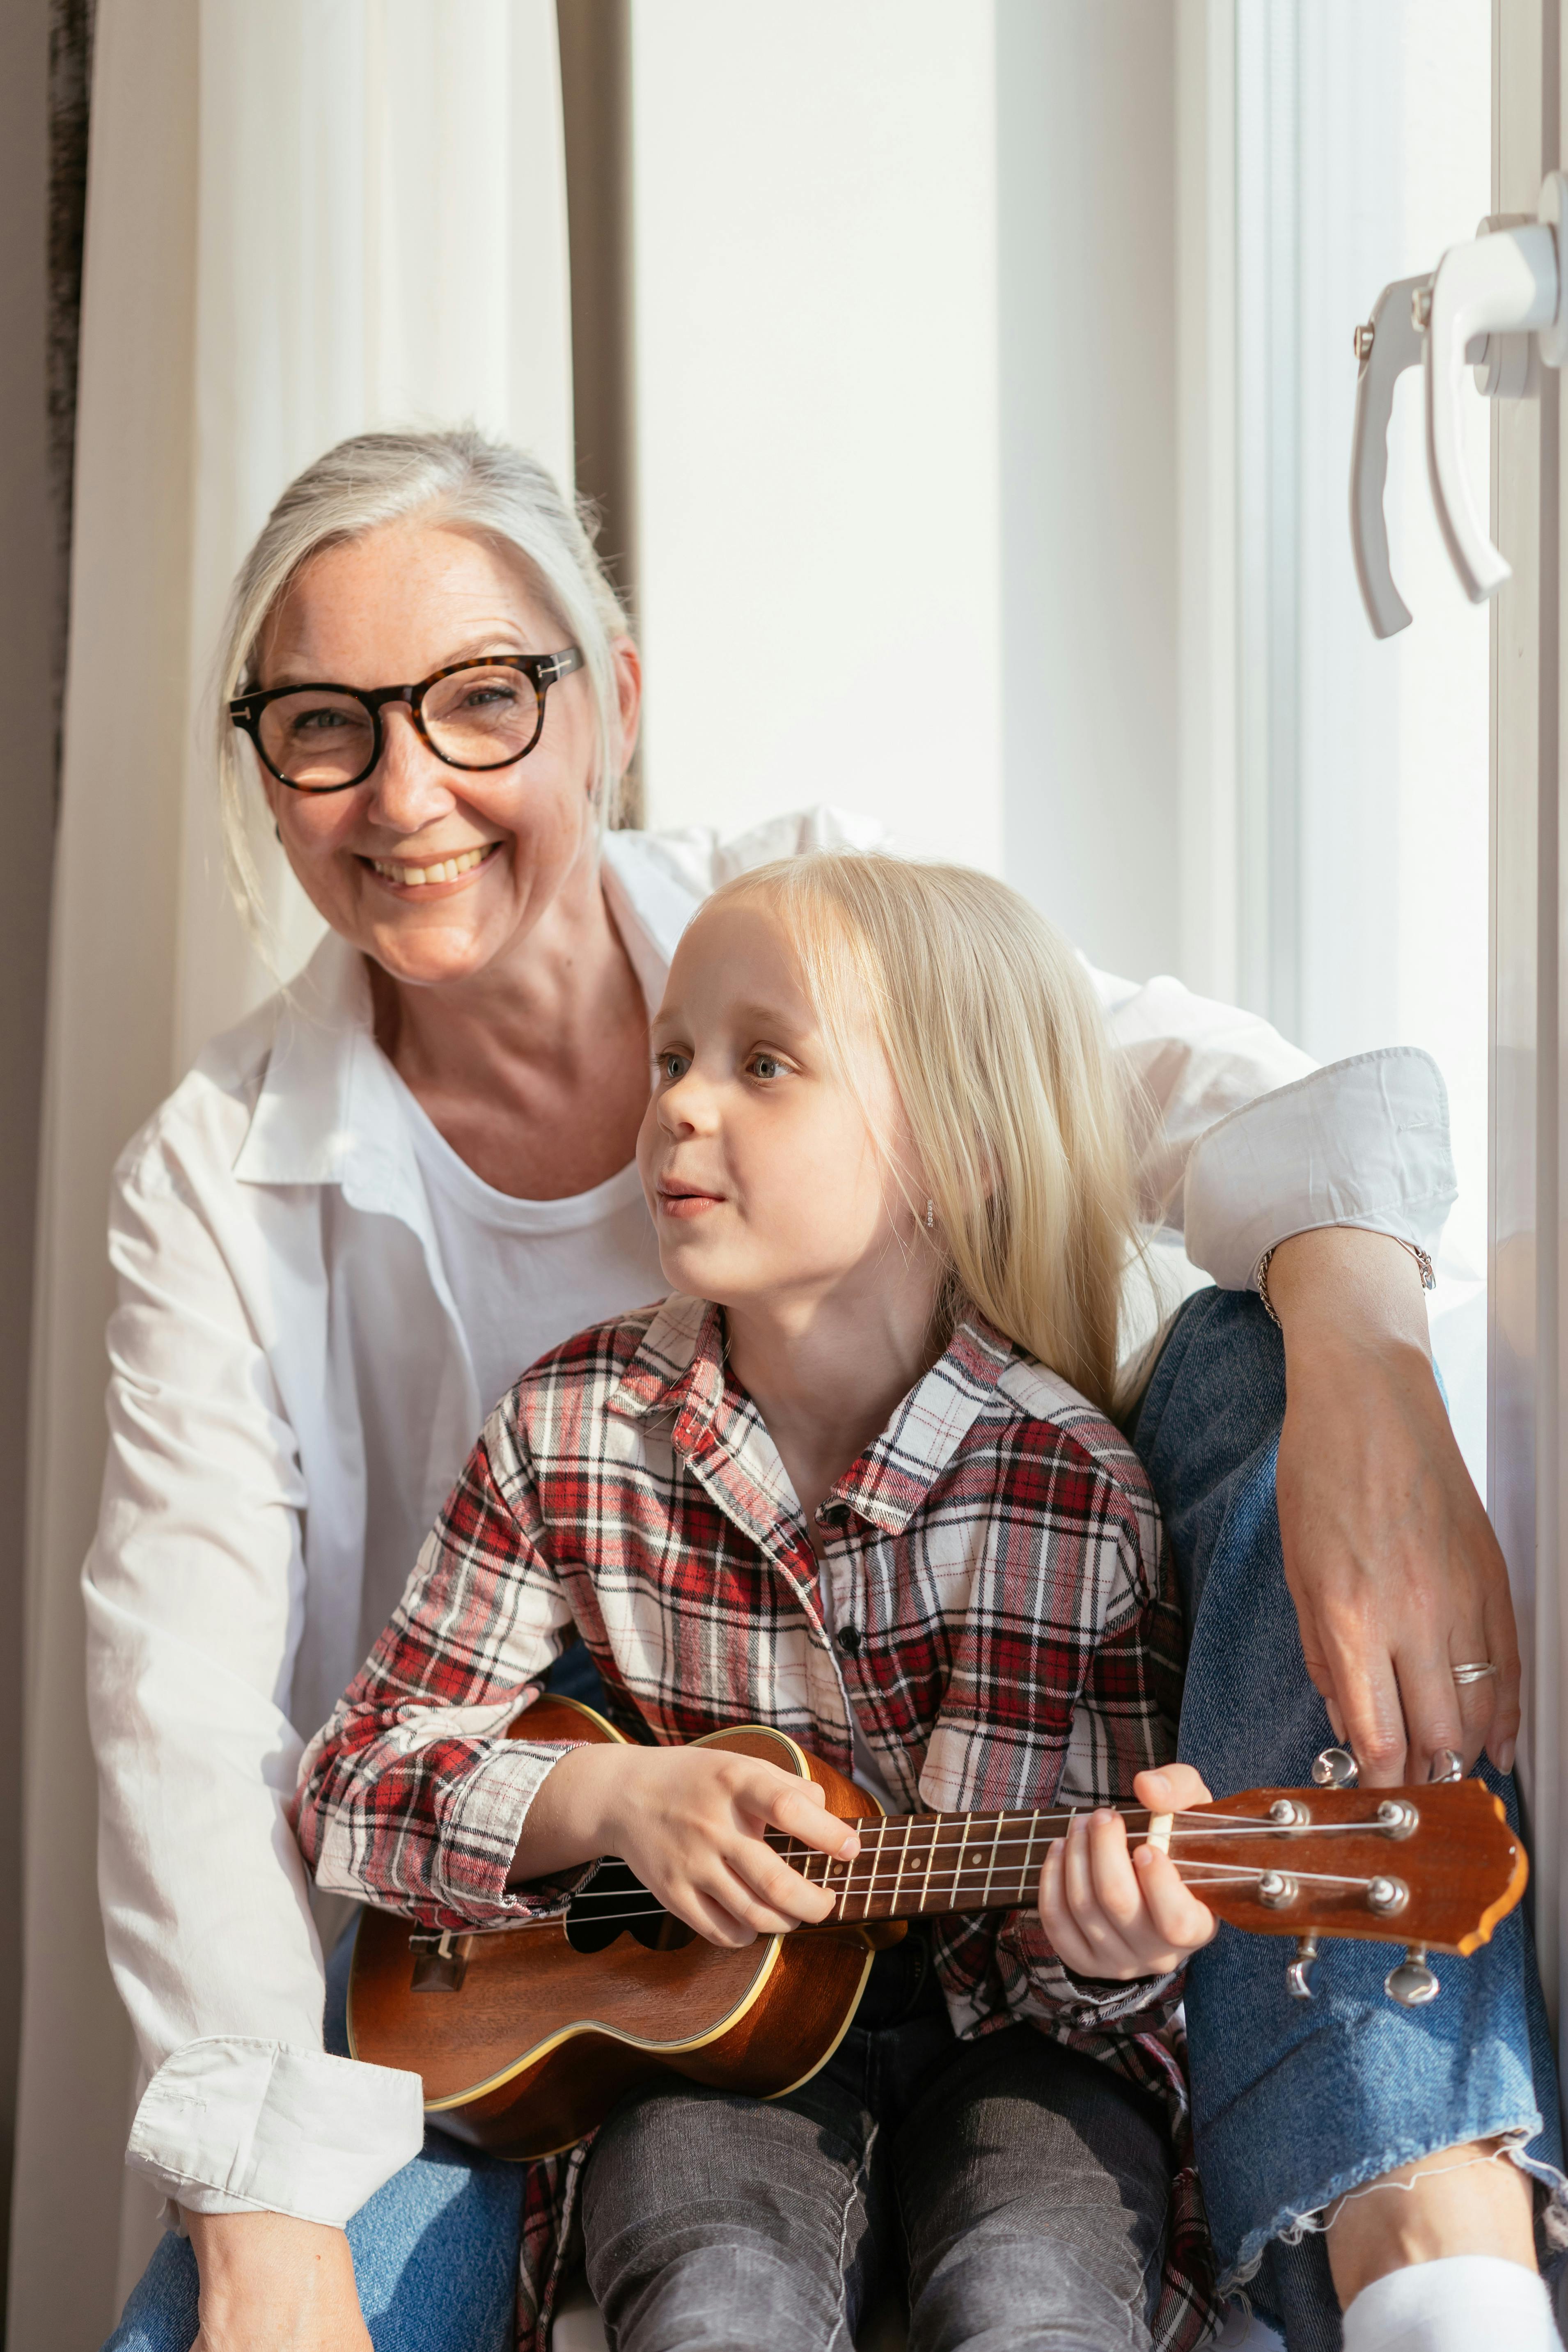 A woman bonding with a little girl holding a guitar | Source: Pexels